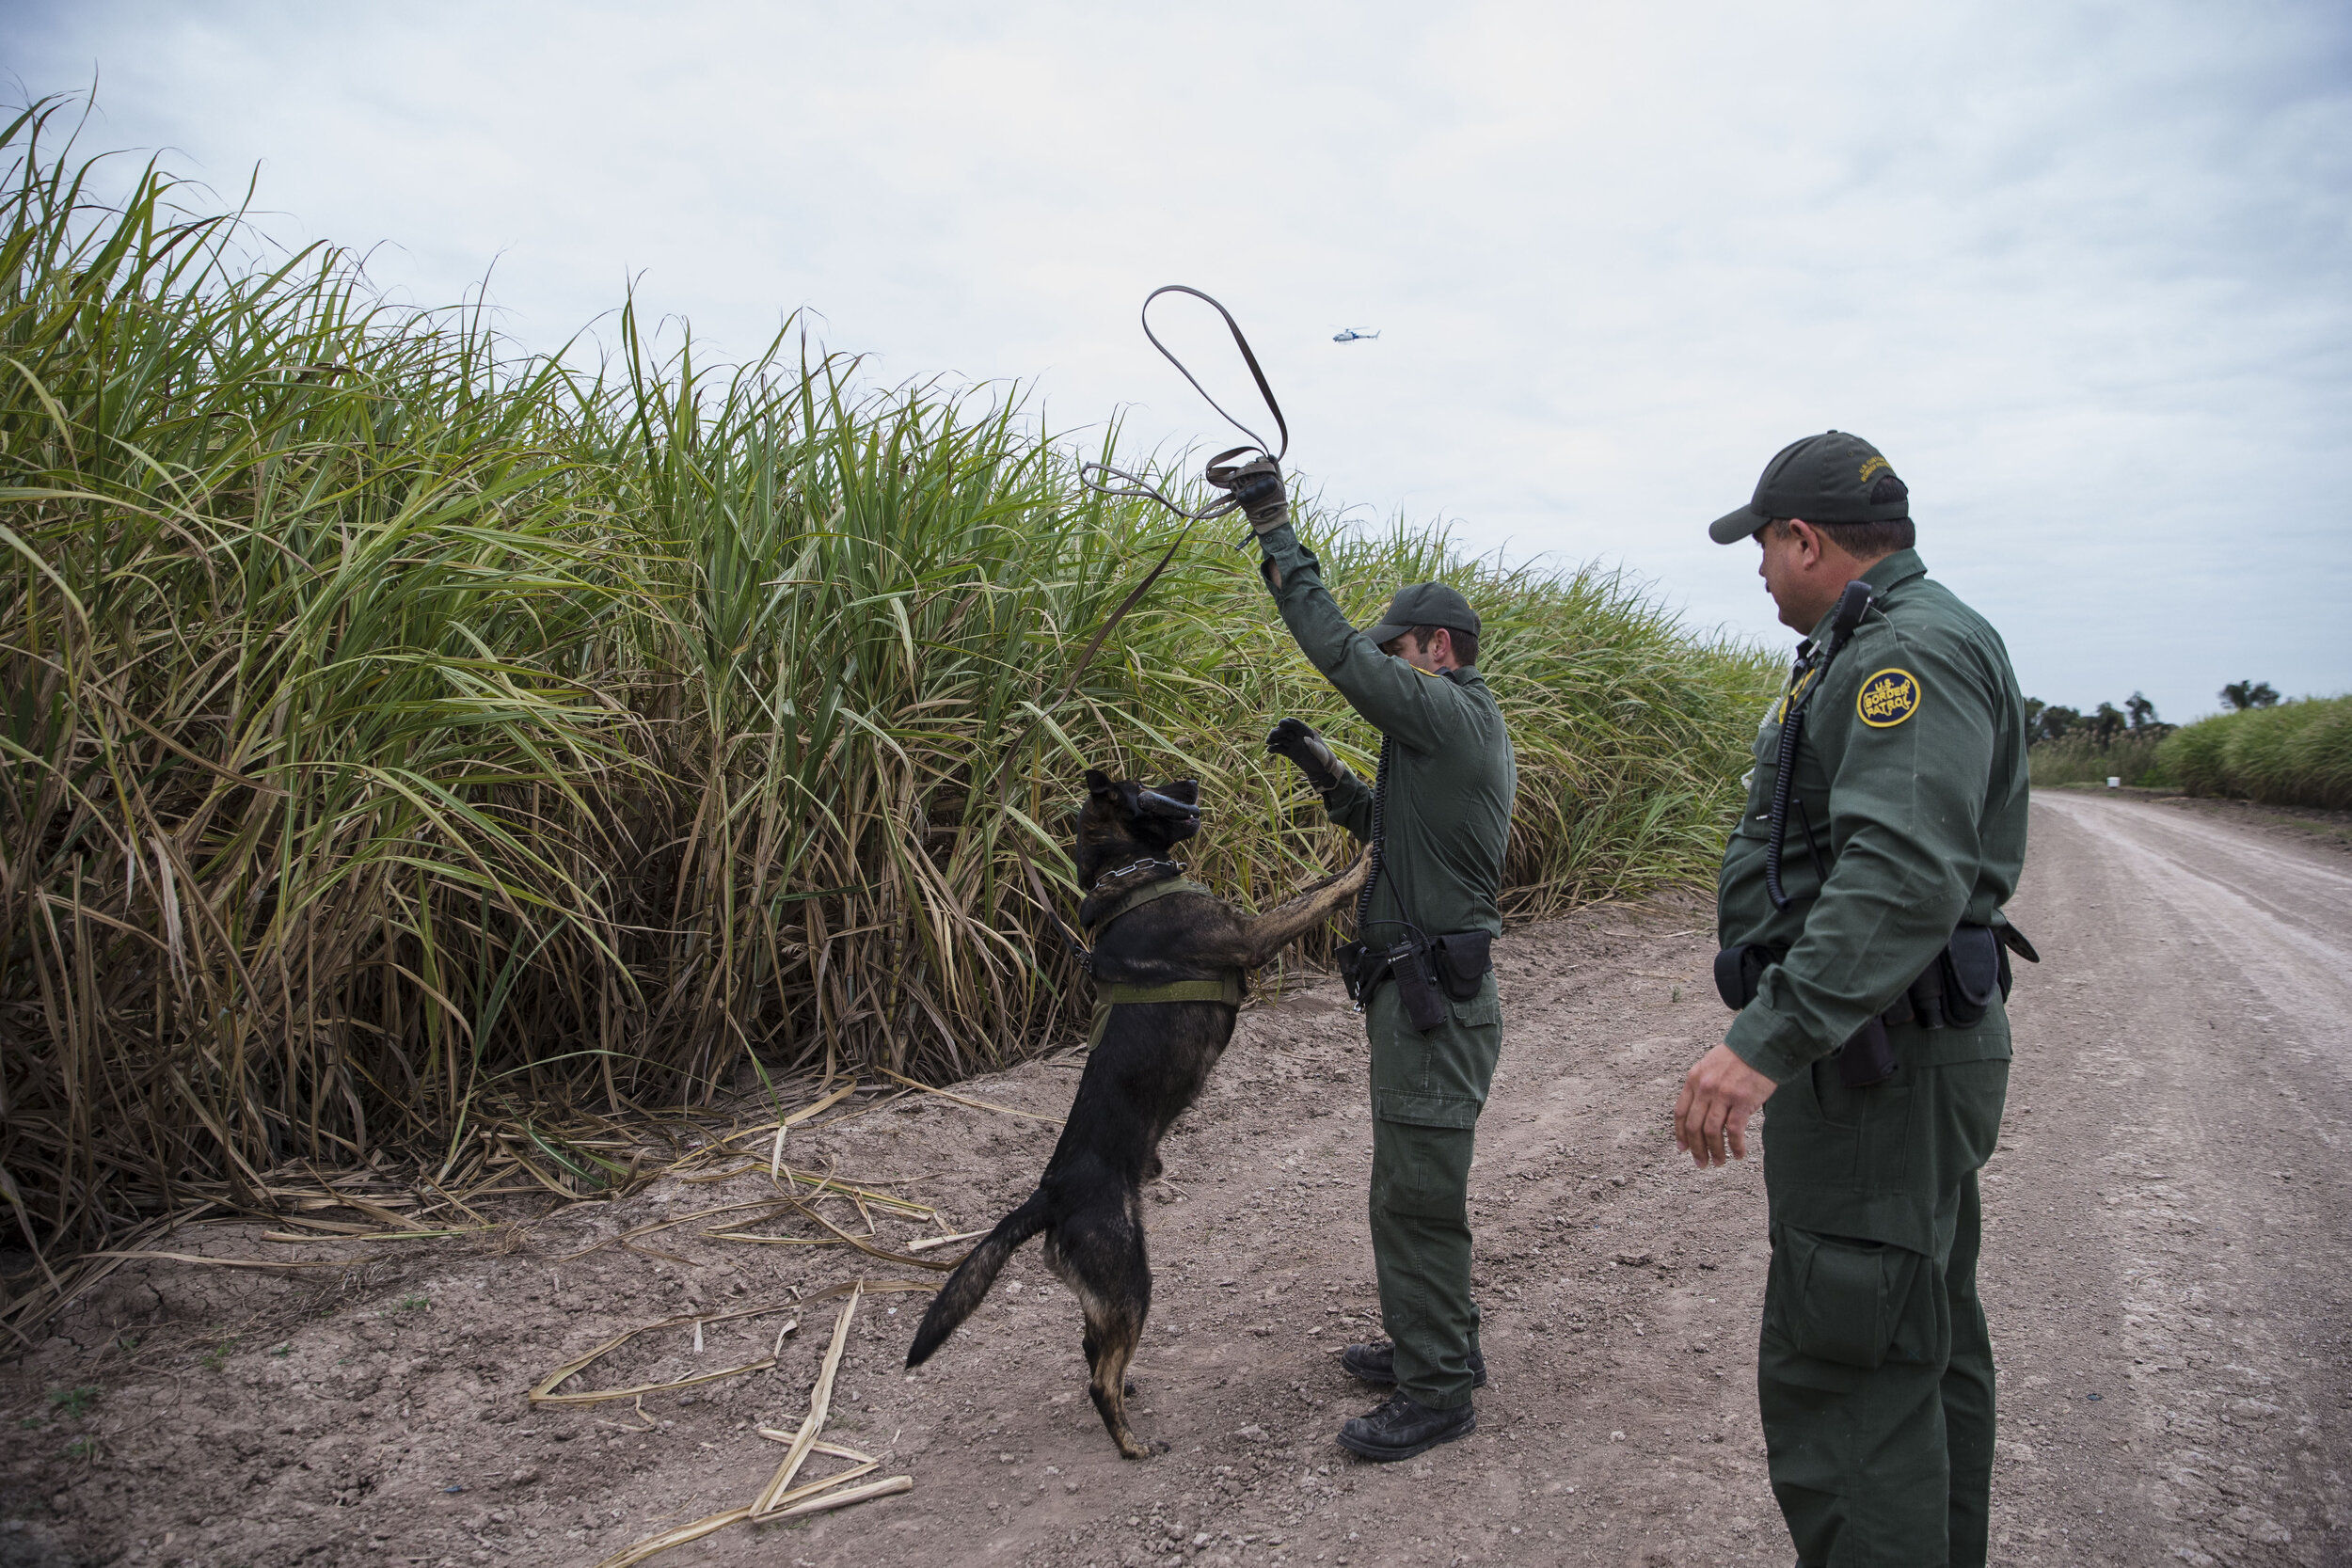  Border Patrol Agent Tait Seelhorst rewards his K-9 after apprehending a group of immigrants crossing the border from Mexico into the United States on Wednesday, Dec. 5, 2018, near McAllen, TX.   [Amanda Voisard/AMERICAN-STATESMAN]  